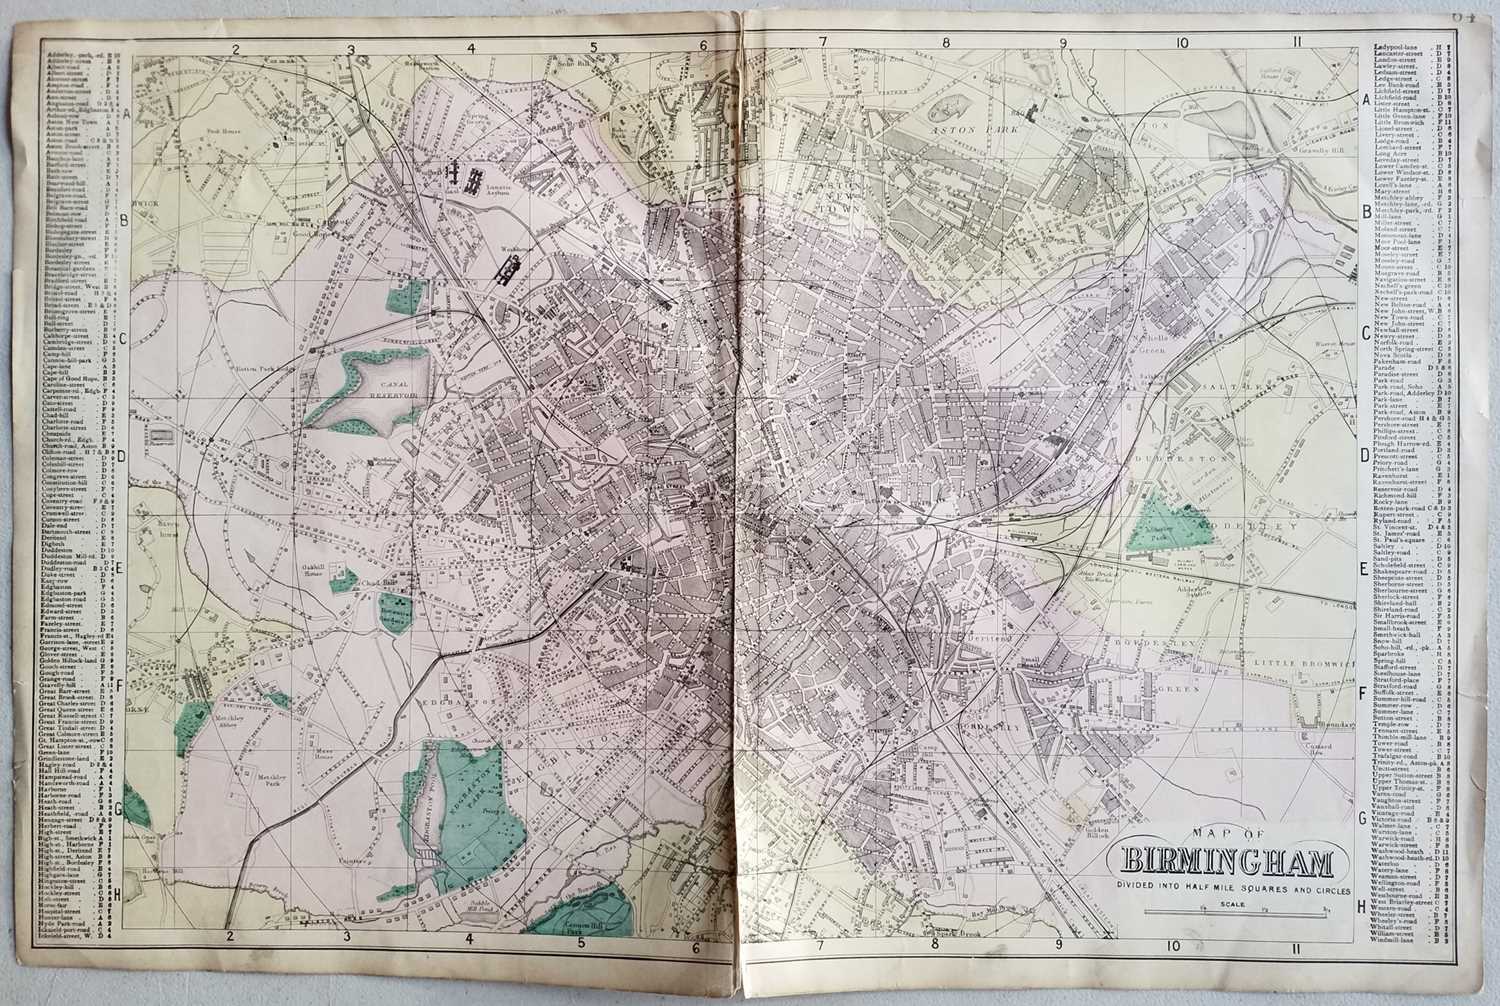 Lot 30 - Maps. A collection of approximately 100 maps, mostly 19th & early 20th century